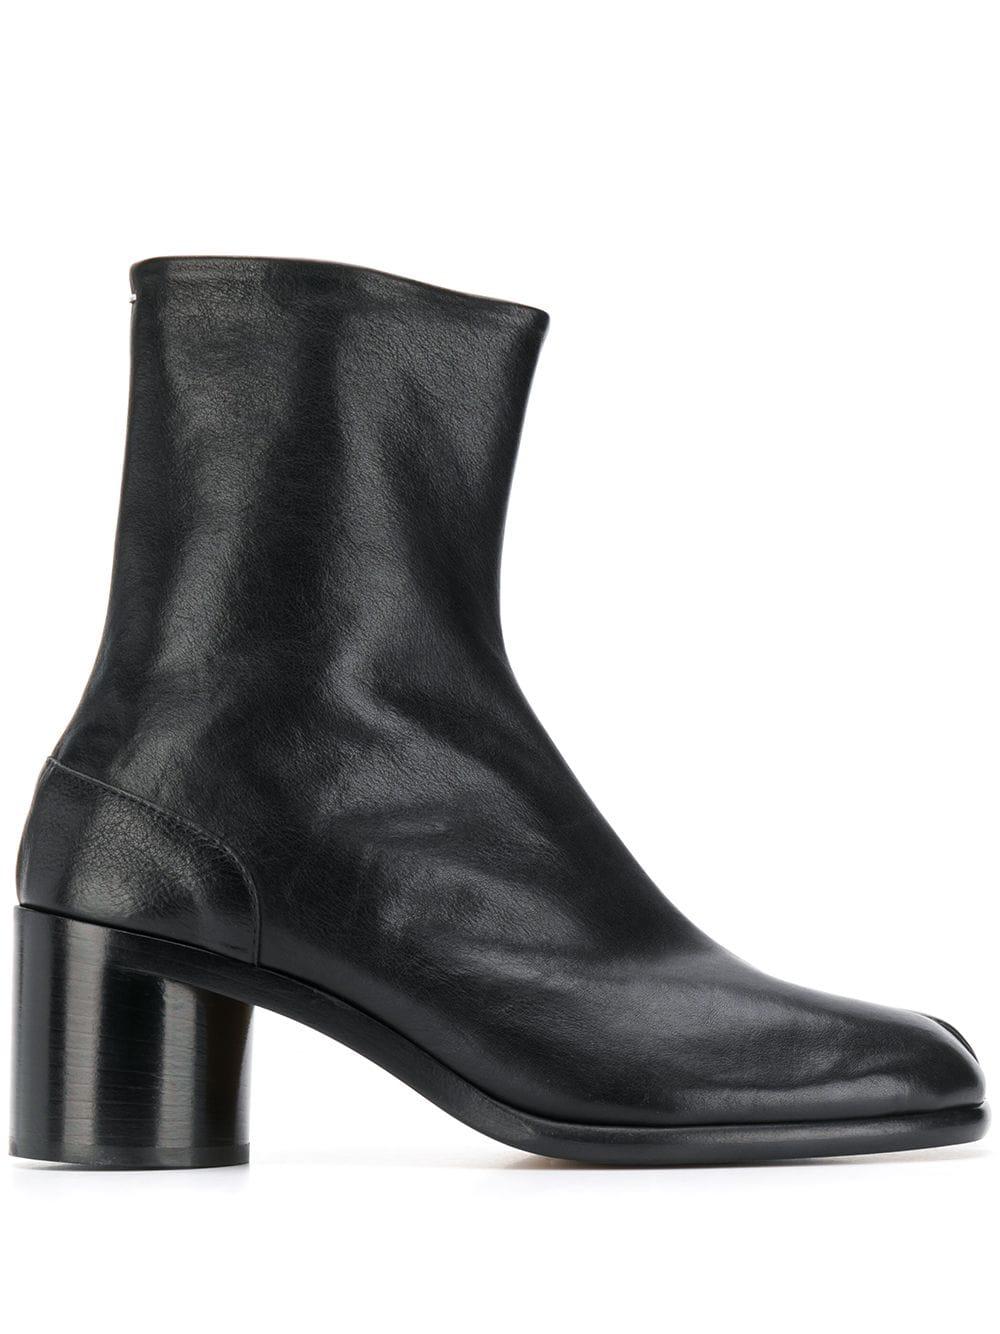 Maison Margiela Leather Tabi Boots in Black for Men - Save 26% - Lyst